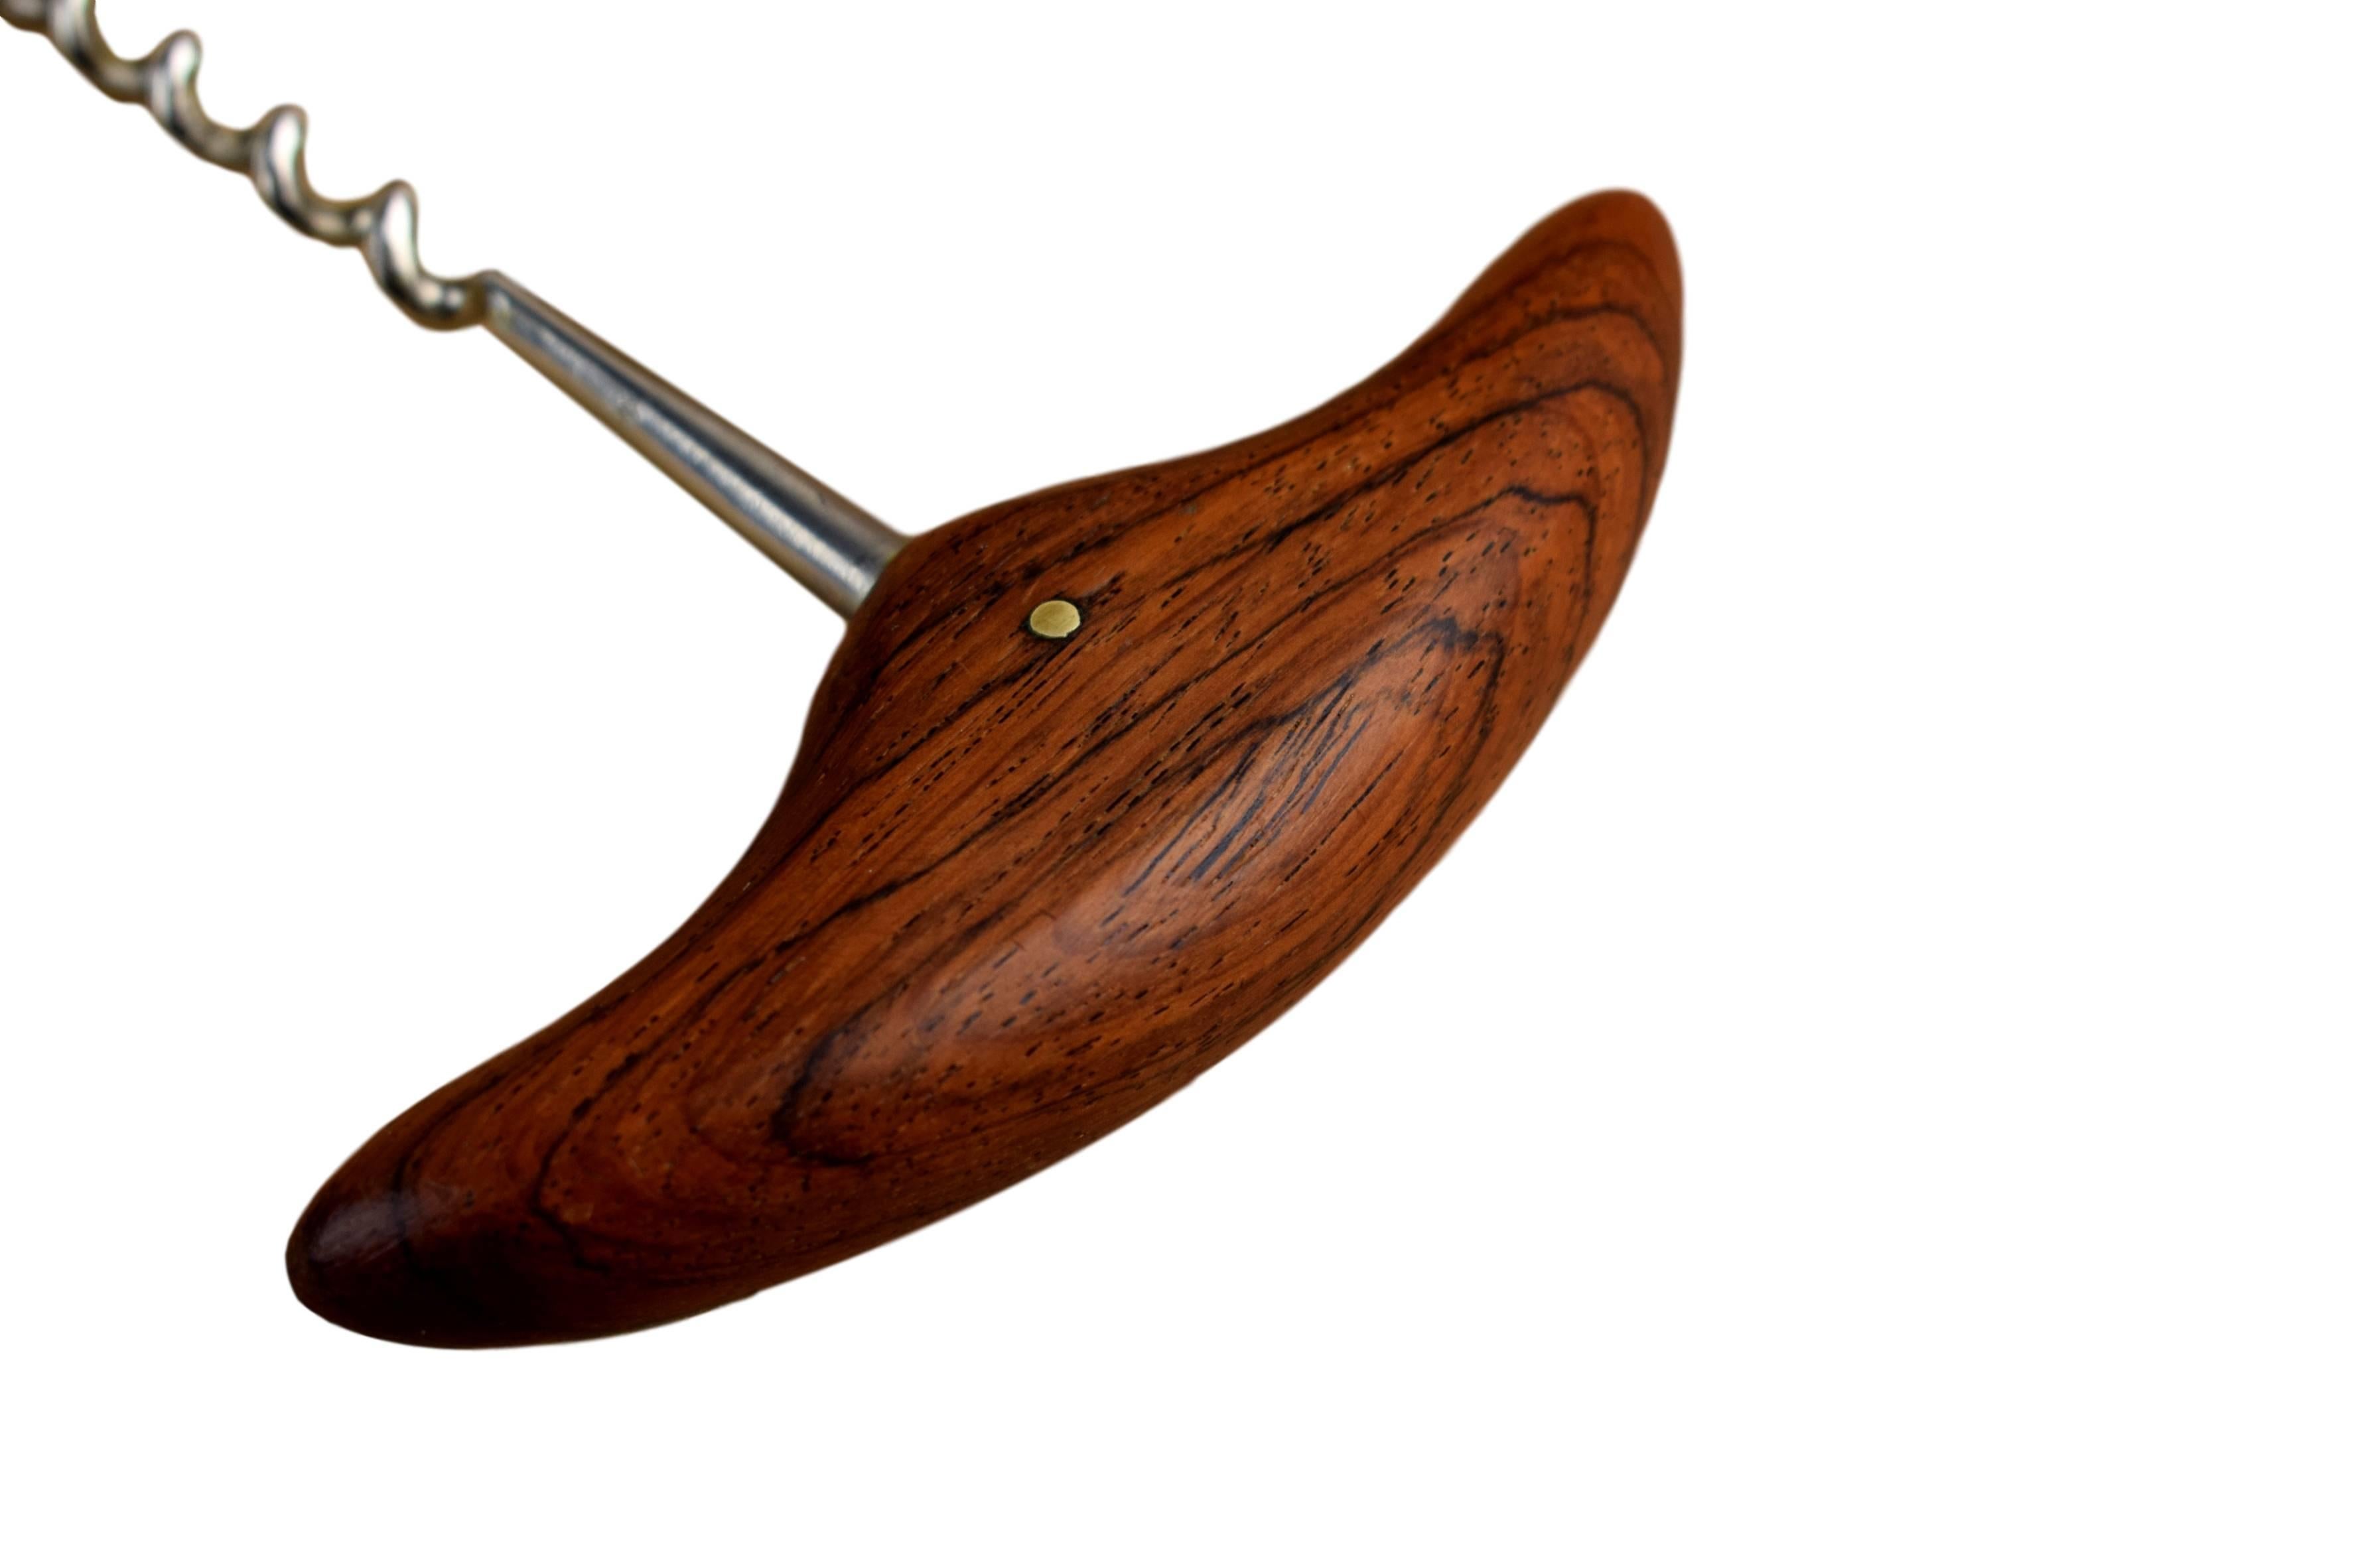 A set of corkscrew and bottle opener with rosewood handles by Kay Bojesen (1886-1958). Produced by Universal Steel company. Bottle opener marked 